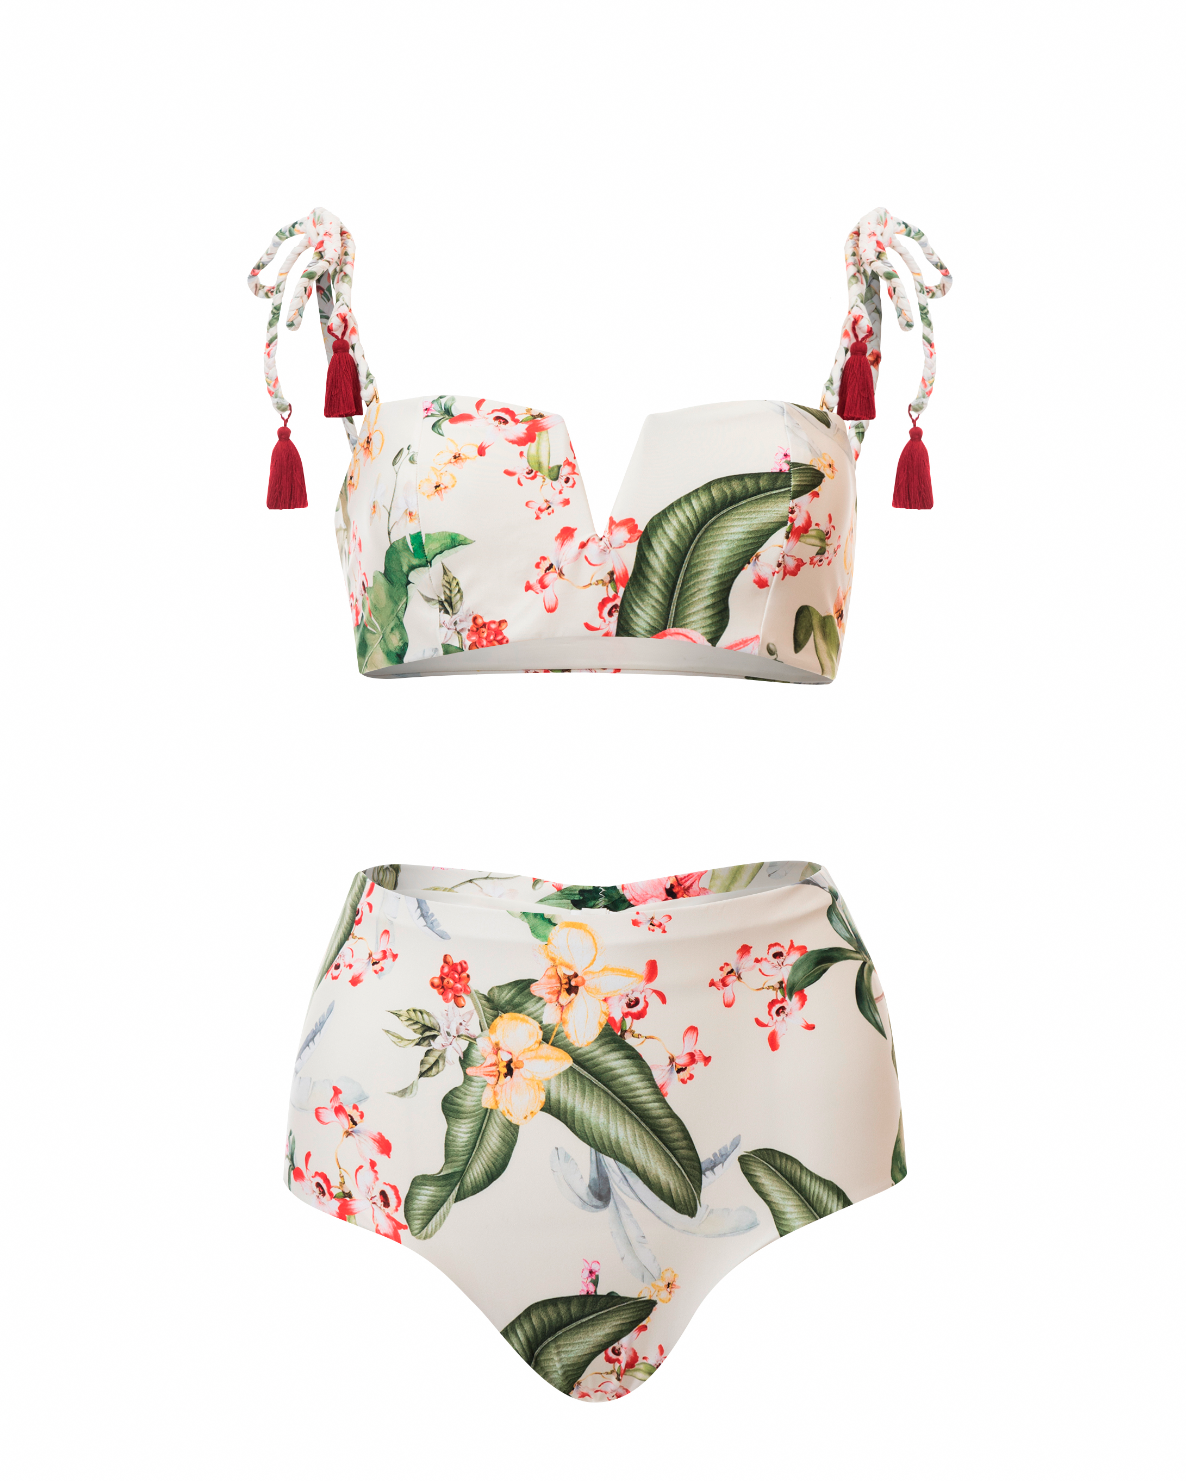 Yuly Narvaez - Quindiana Strapless Two Pieces